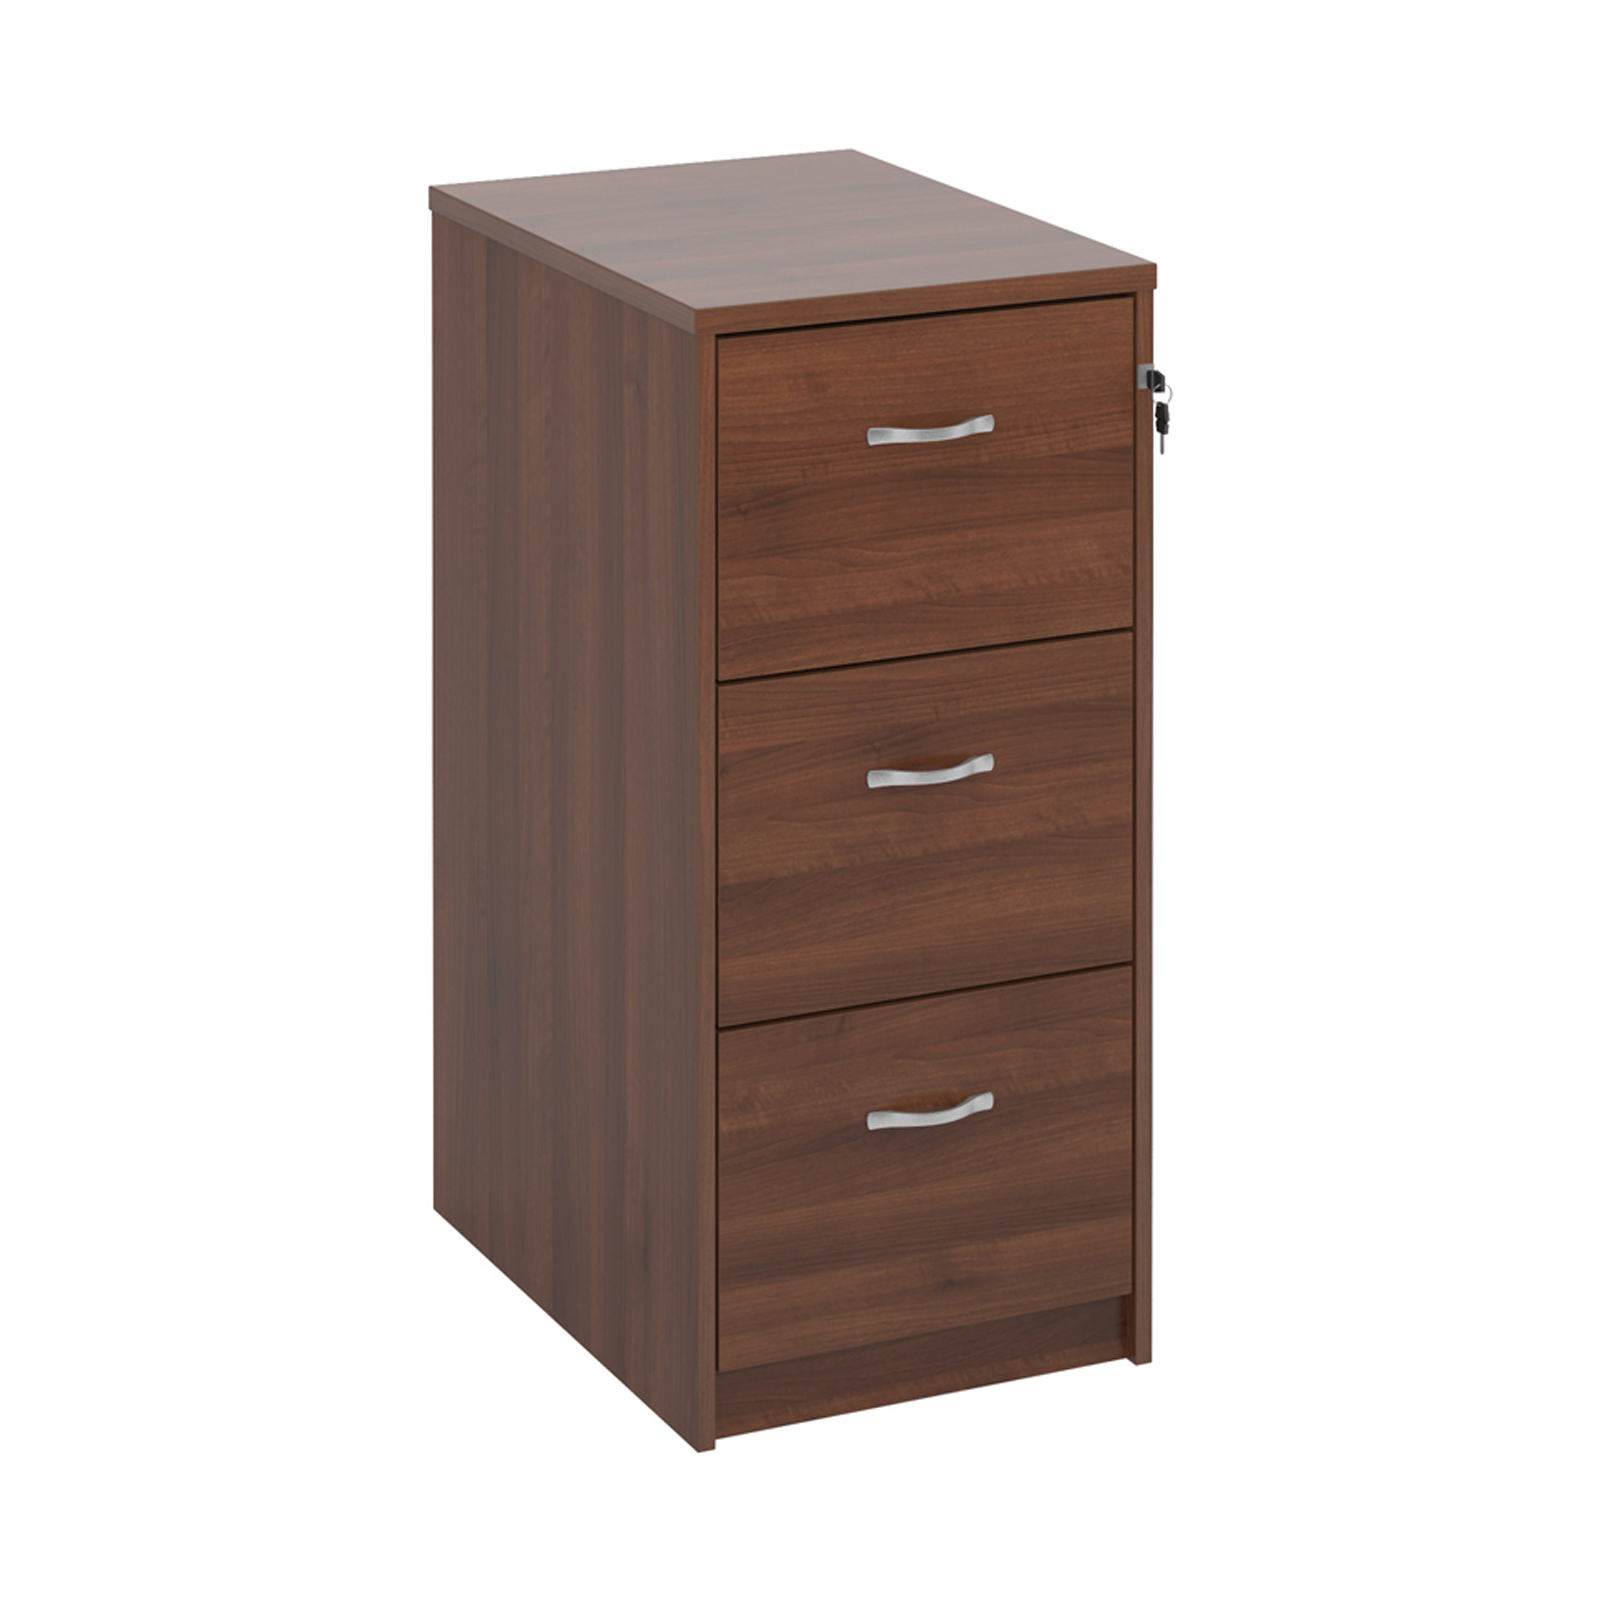 Wood Wooden 3 drawer filing cabinet with silver handles 1045mm high - walnut